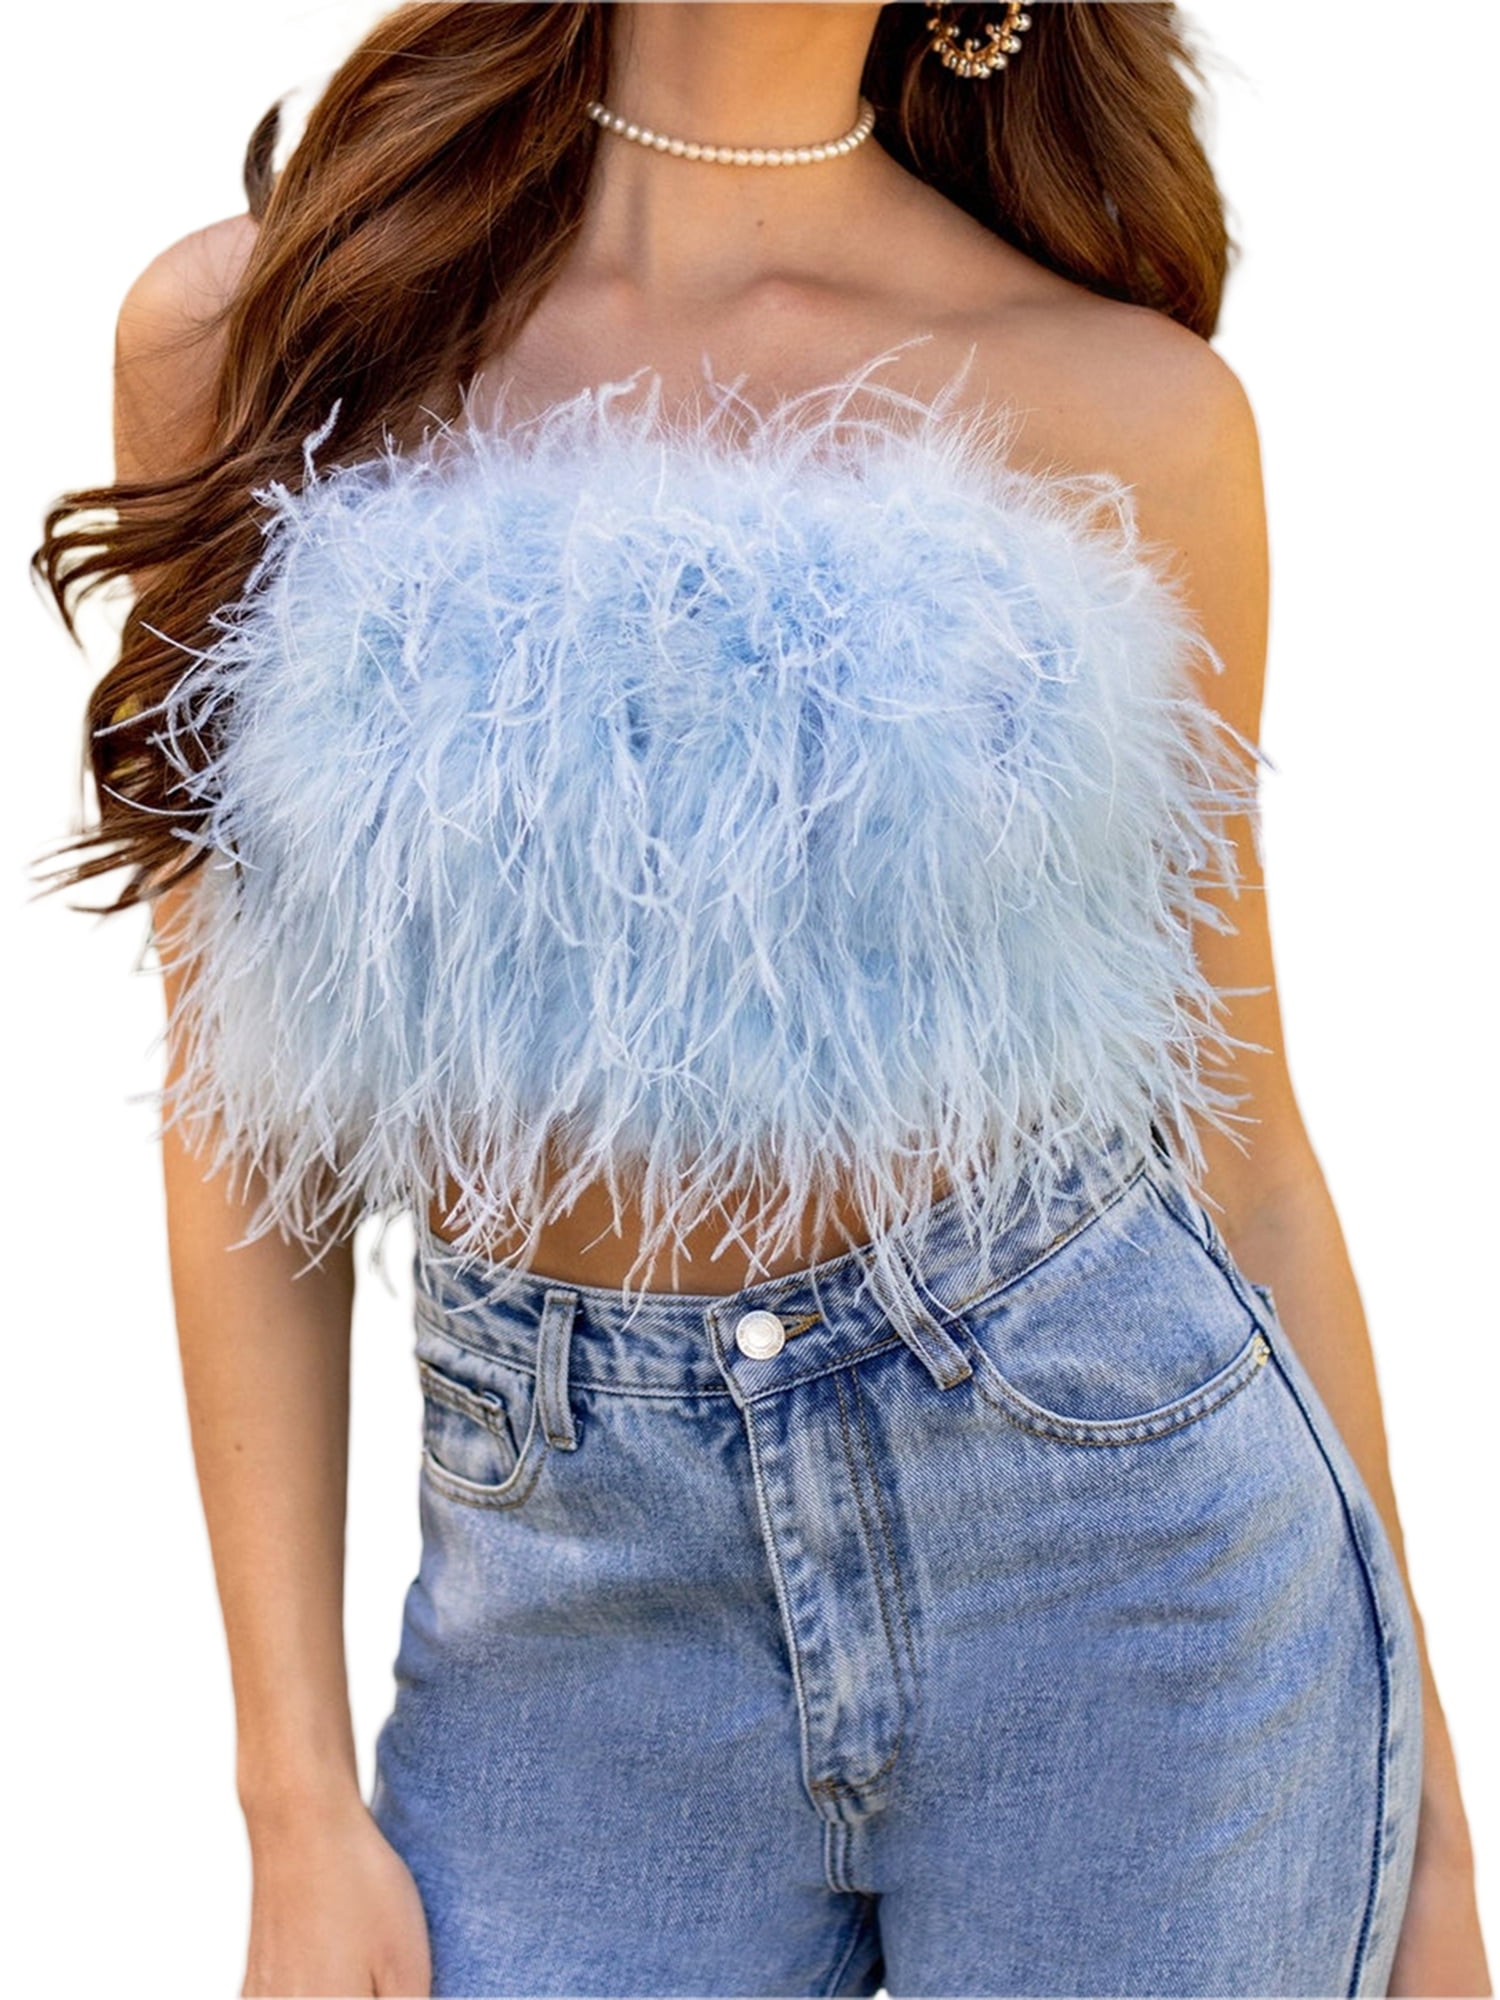 Youweixiong Women Sexy Feather Crop Top Furry Faux Fur Strapless Tube Top  Backless Tank Tops Rave Cami Corset Vest Party Clubwear